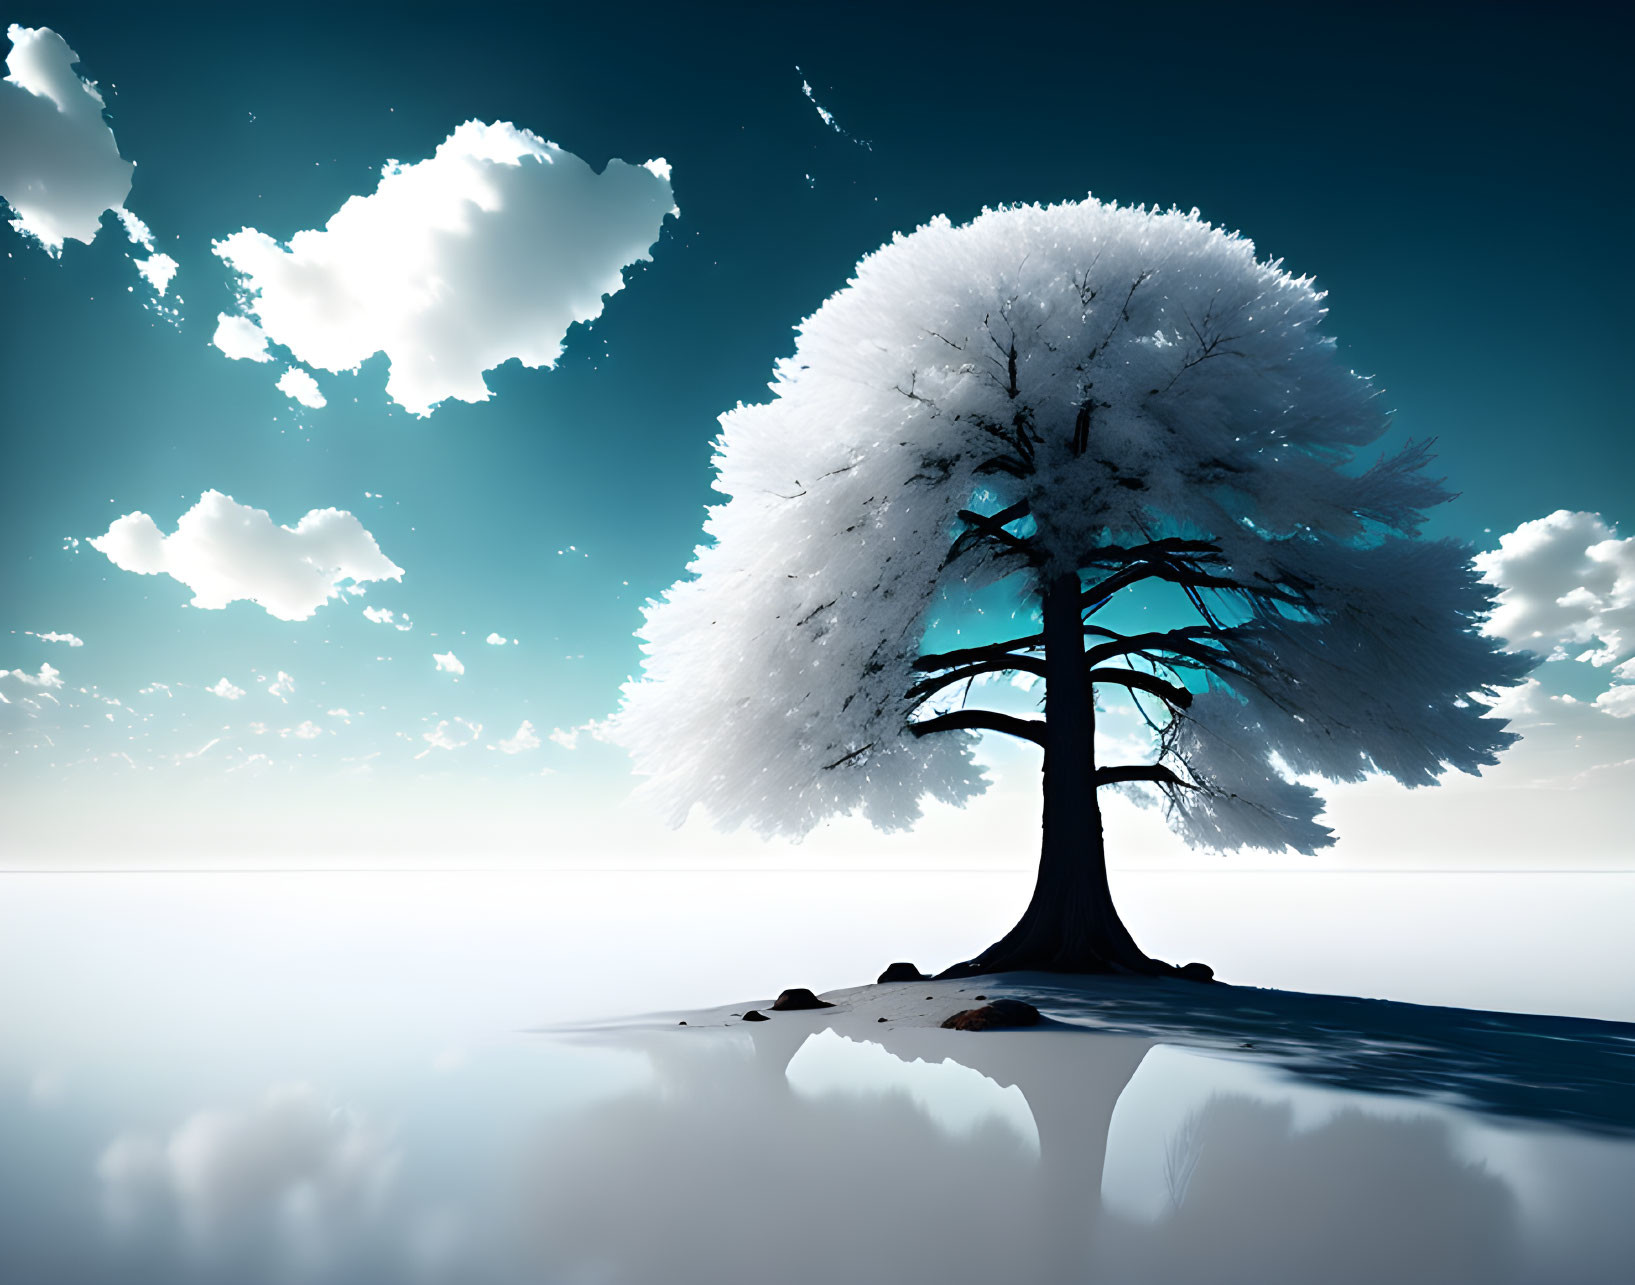 White Tree on Reflective Surface with Clouds and Blue Sky